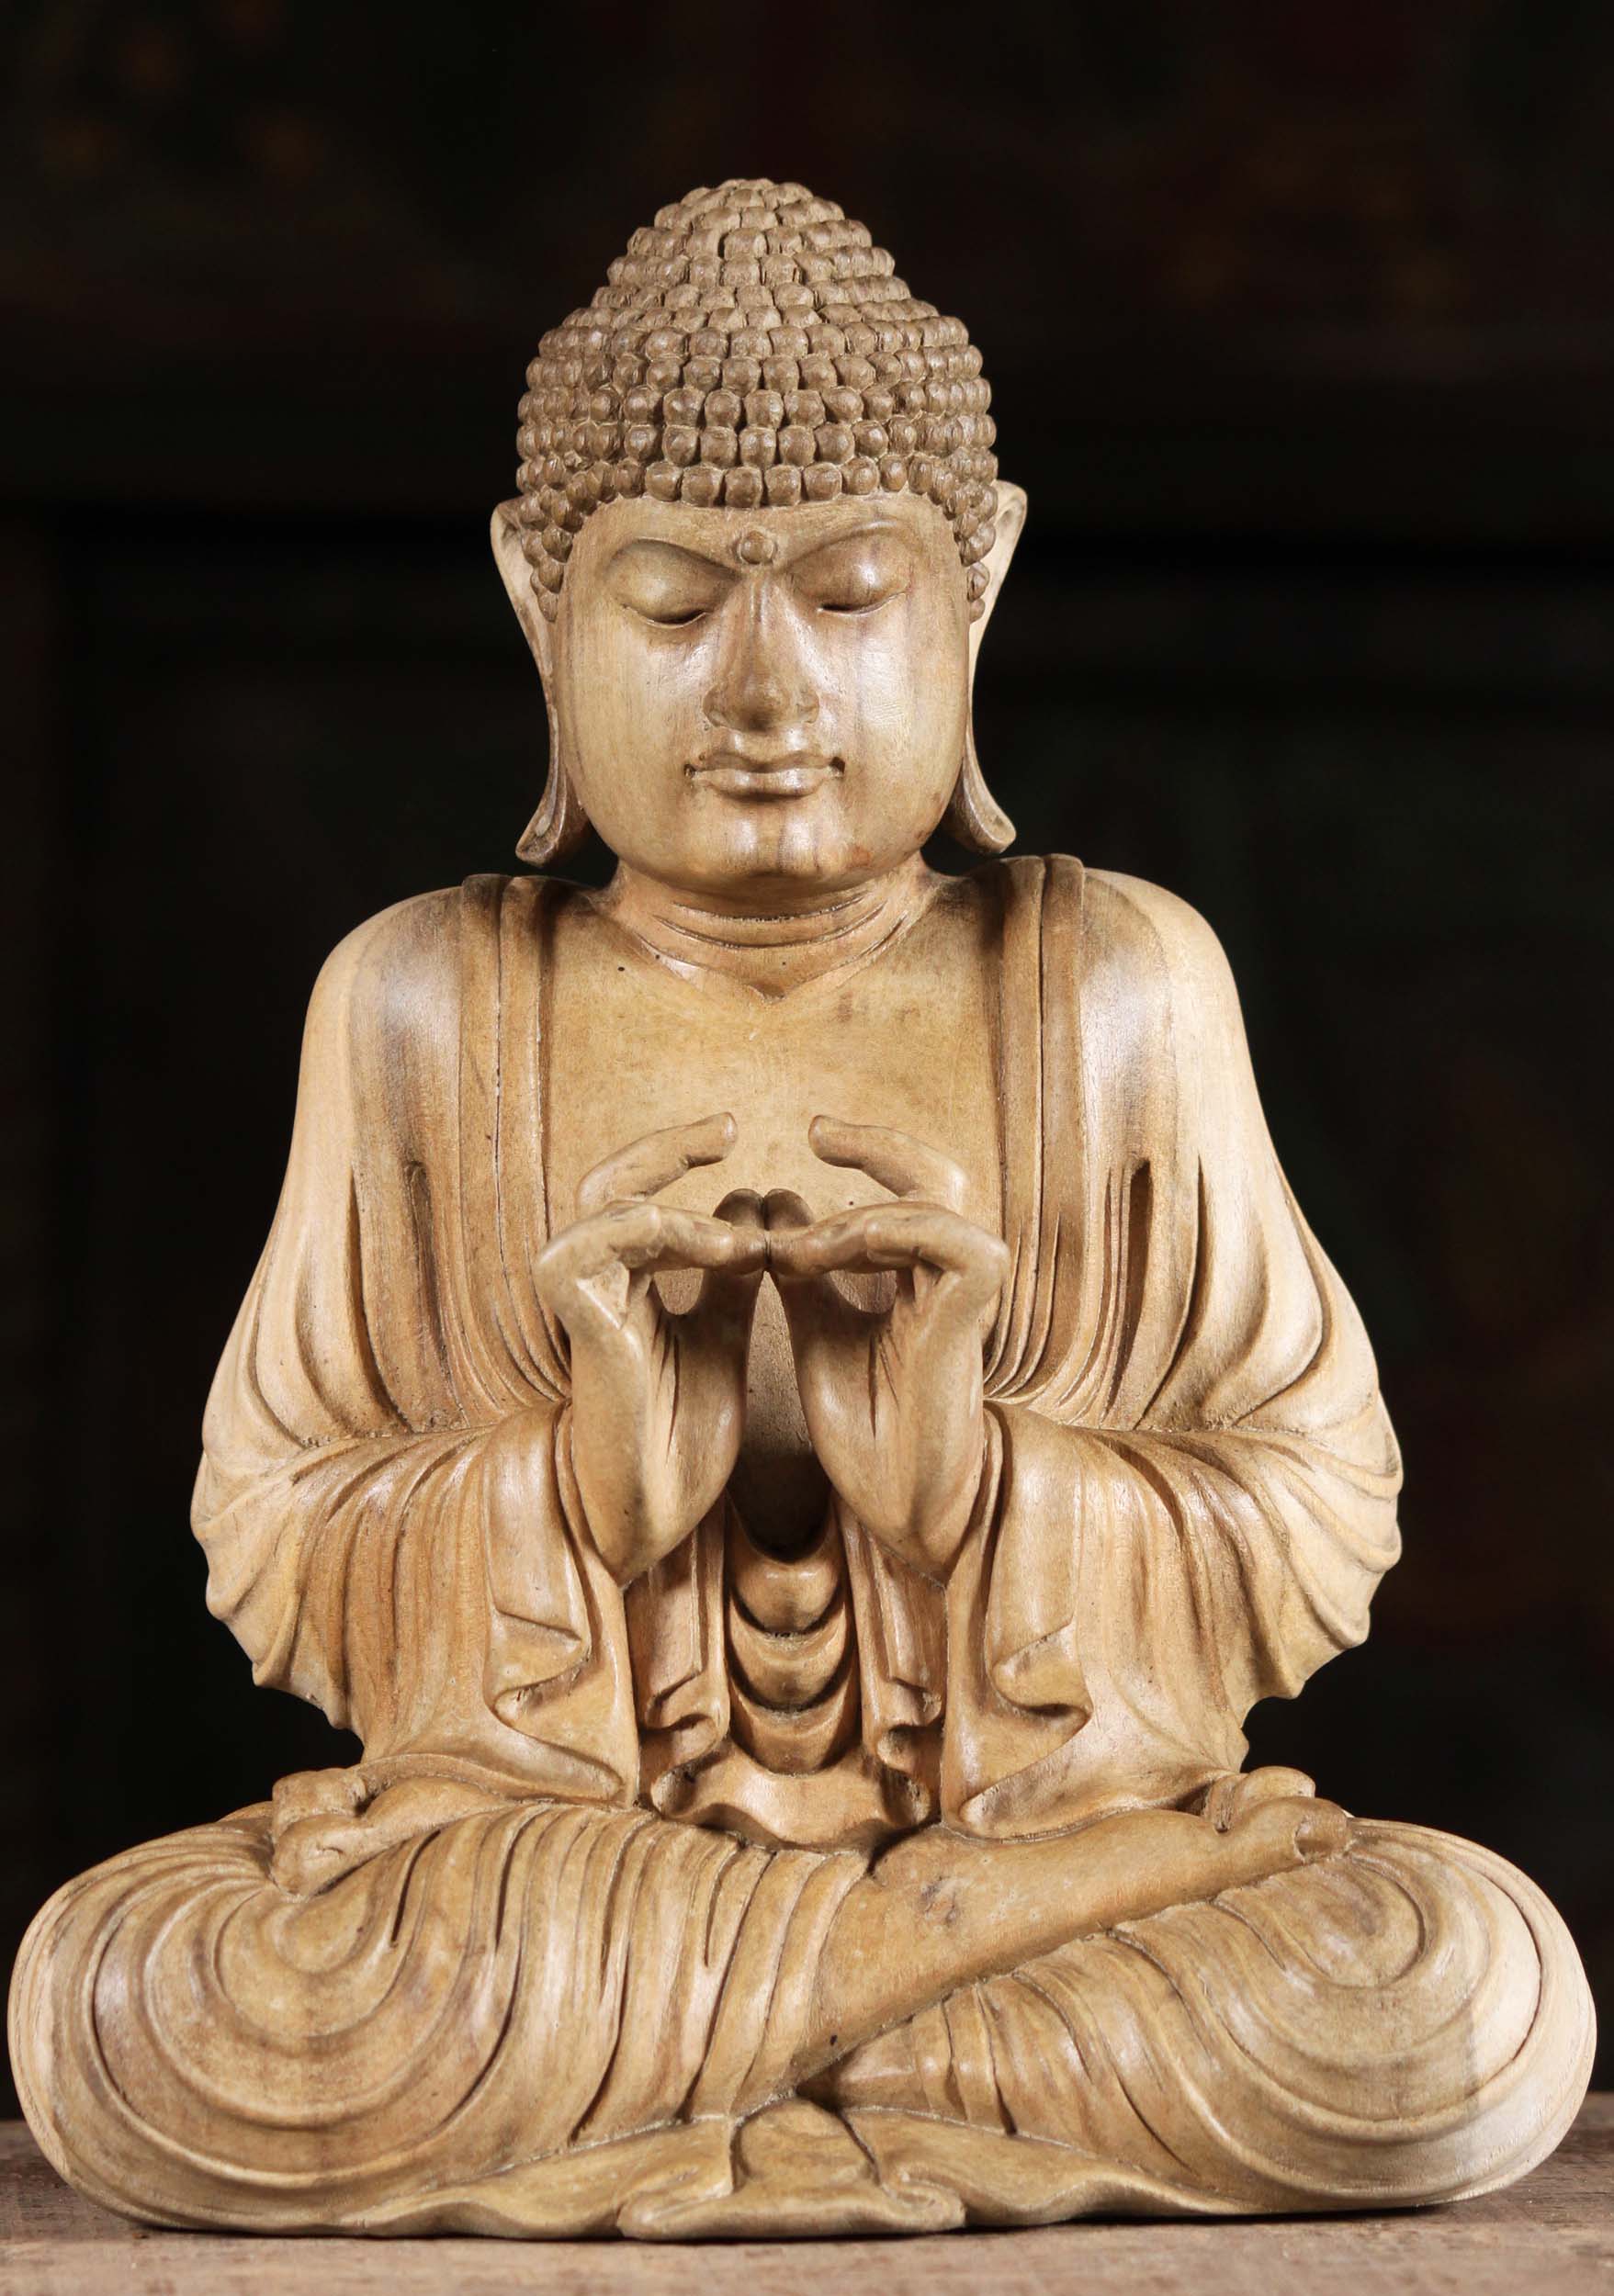 SOLD Wood Buddha Statue with Hands In Heart Shape 10